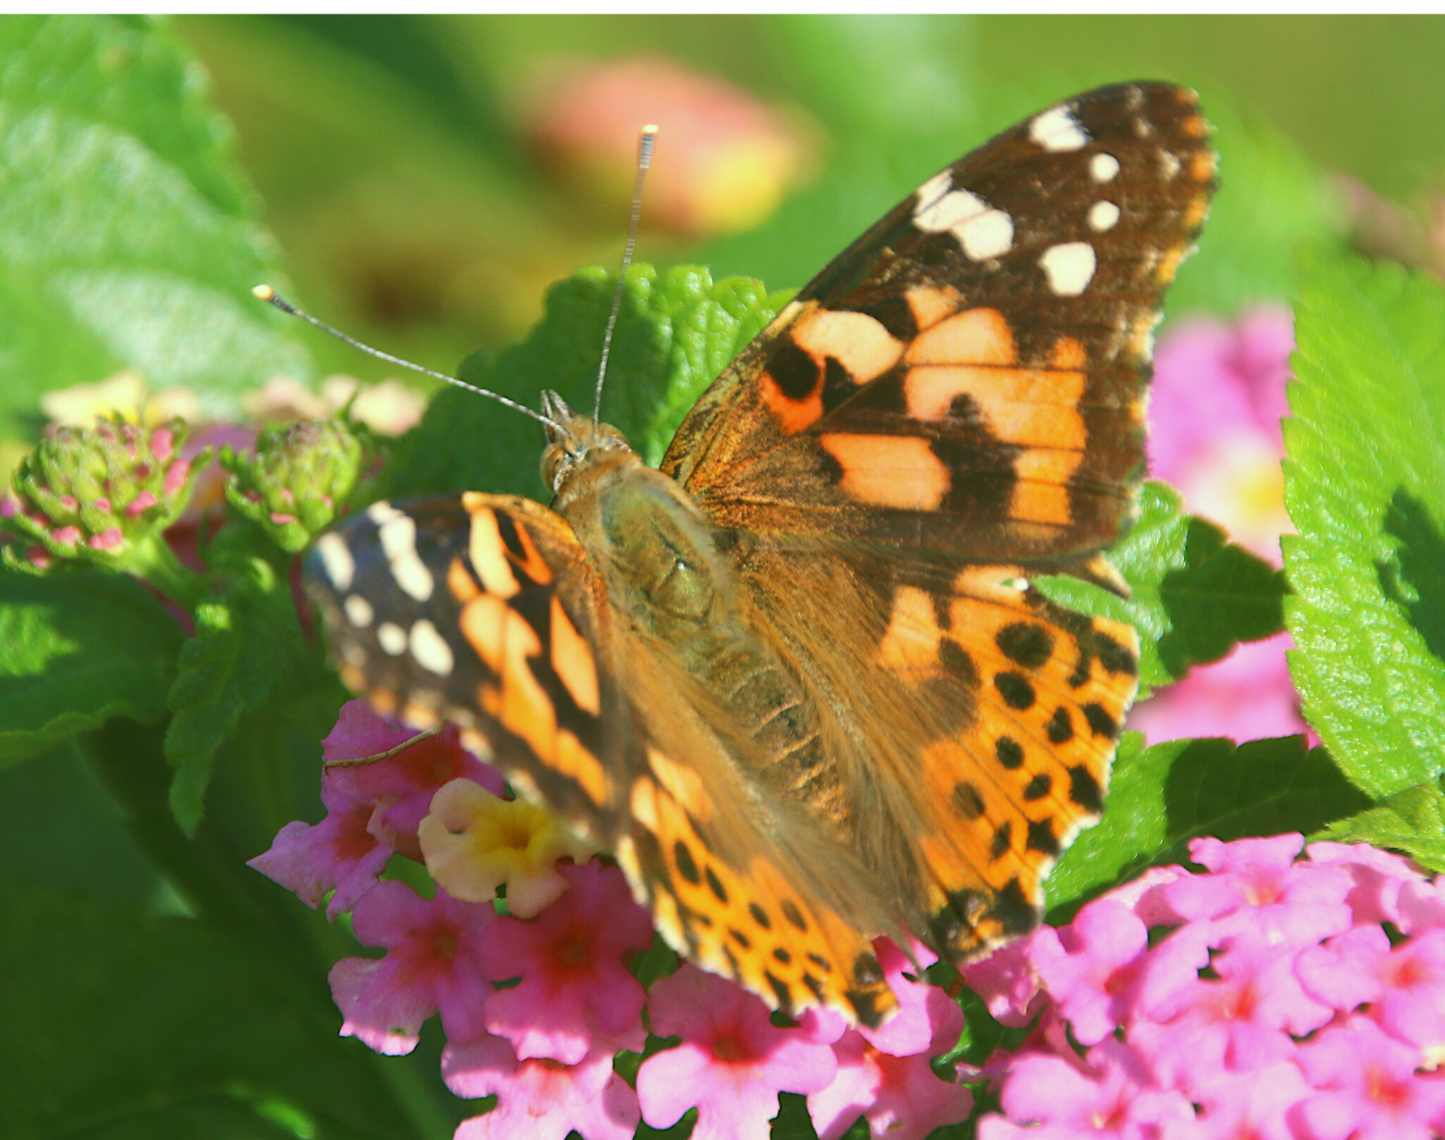 COMING IN JUNE! Mixed Butterflies in an Elegant White Release Box ~ CALIFORNIA CUSTOMERS ONLY